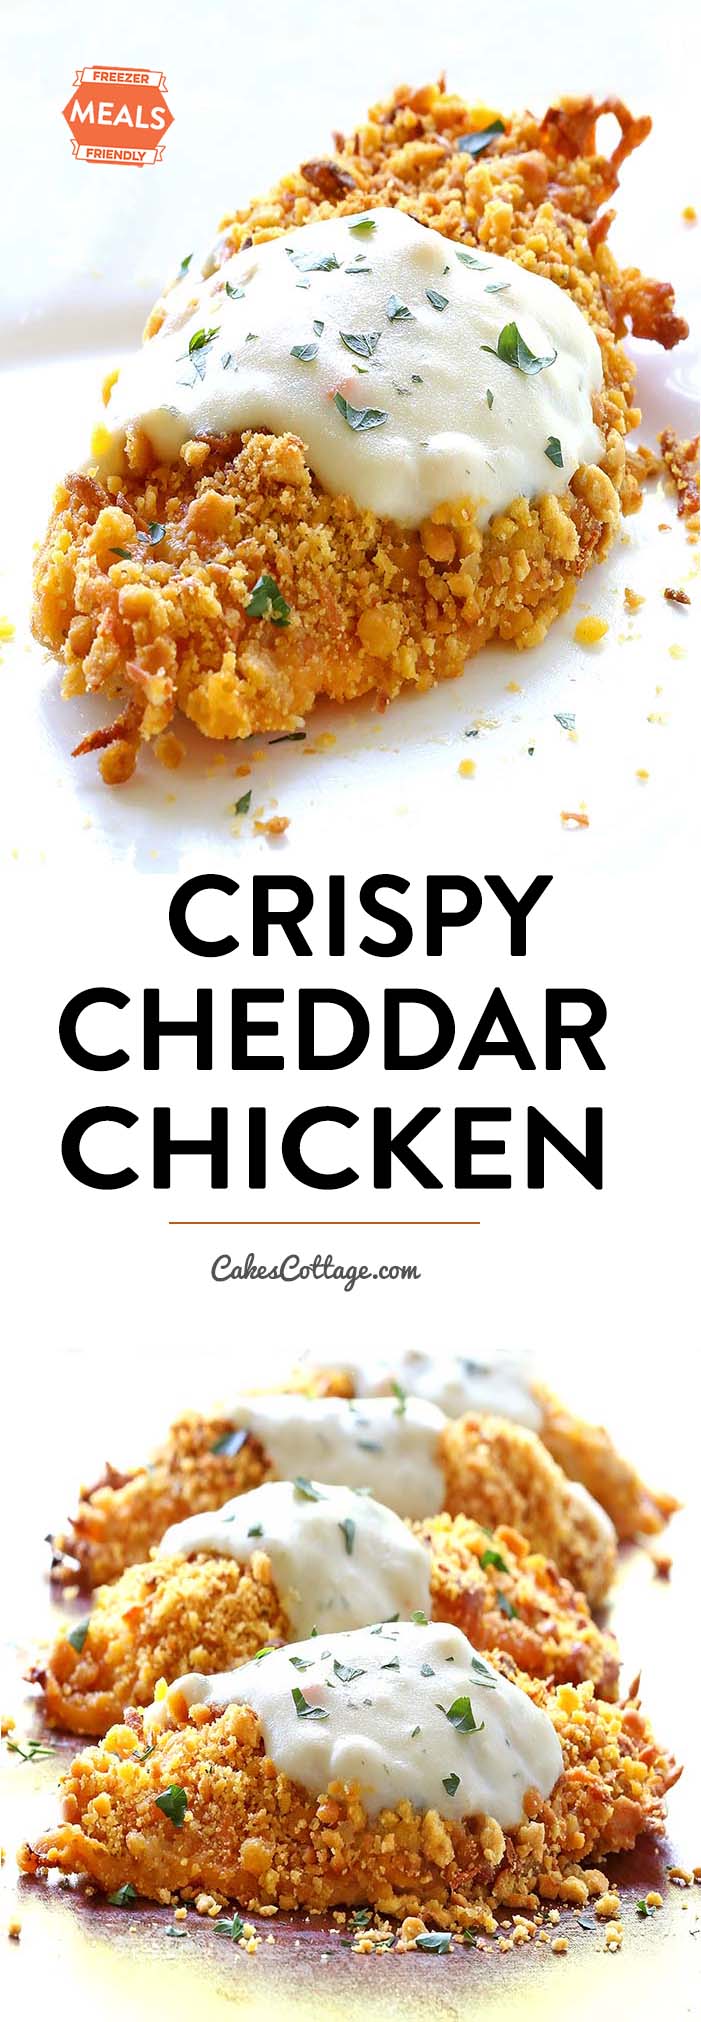 Tender and juicy chicken coated in cheddar cheese, ritz cracker crumbs and baked to crispy perfection.  It is such a quick and easy dinner, uses simple ingredients, and the whole family will love it! Try making this amazing recipe from CakesCottage today! #cheddar #easy #chicken #recipes #dinner